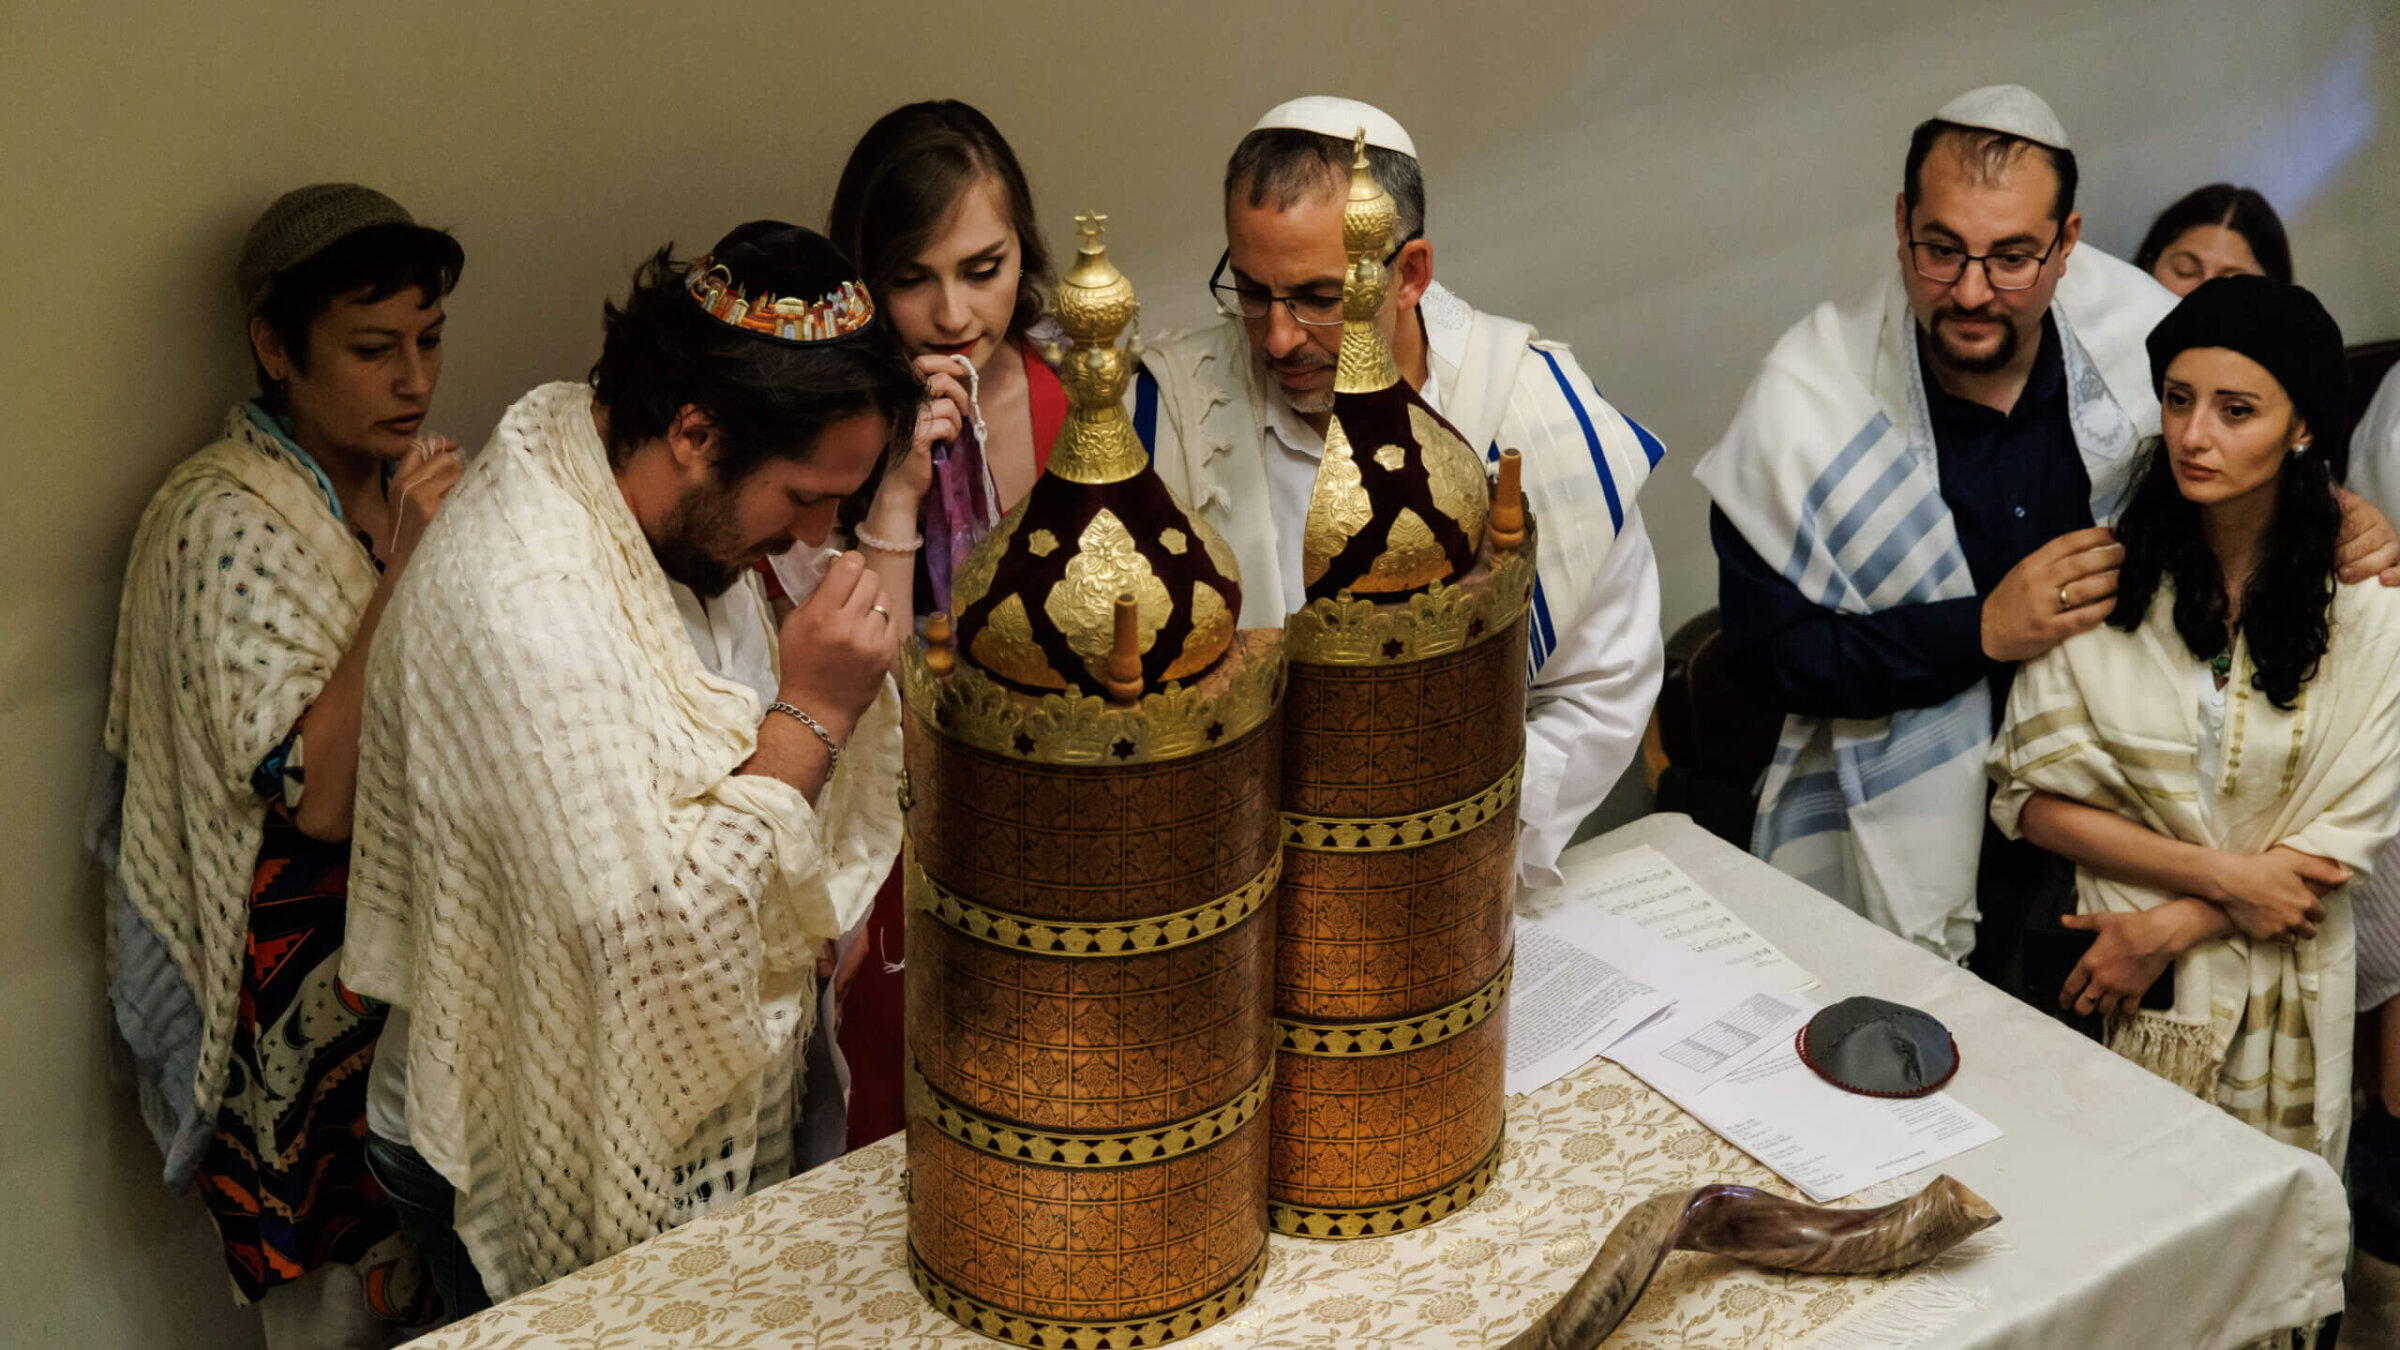 During the first b'nai mitzvah at Tbilisi's  Peace Synagogue, Nina Mgeladze, center, was one of the first women to read Torah in Georgia's 2,600 years of Jewish history. Rabbi Golan Ben-Chorin of Haifa, to her left, ls the nascent congregation's spiritual leader. At right are Misha Grishashvili, the synagogue's founding president, and his wife, Keti Chikviladze, director of Georgia's Hillel, both of whom also became b'nai mitzvah.